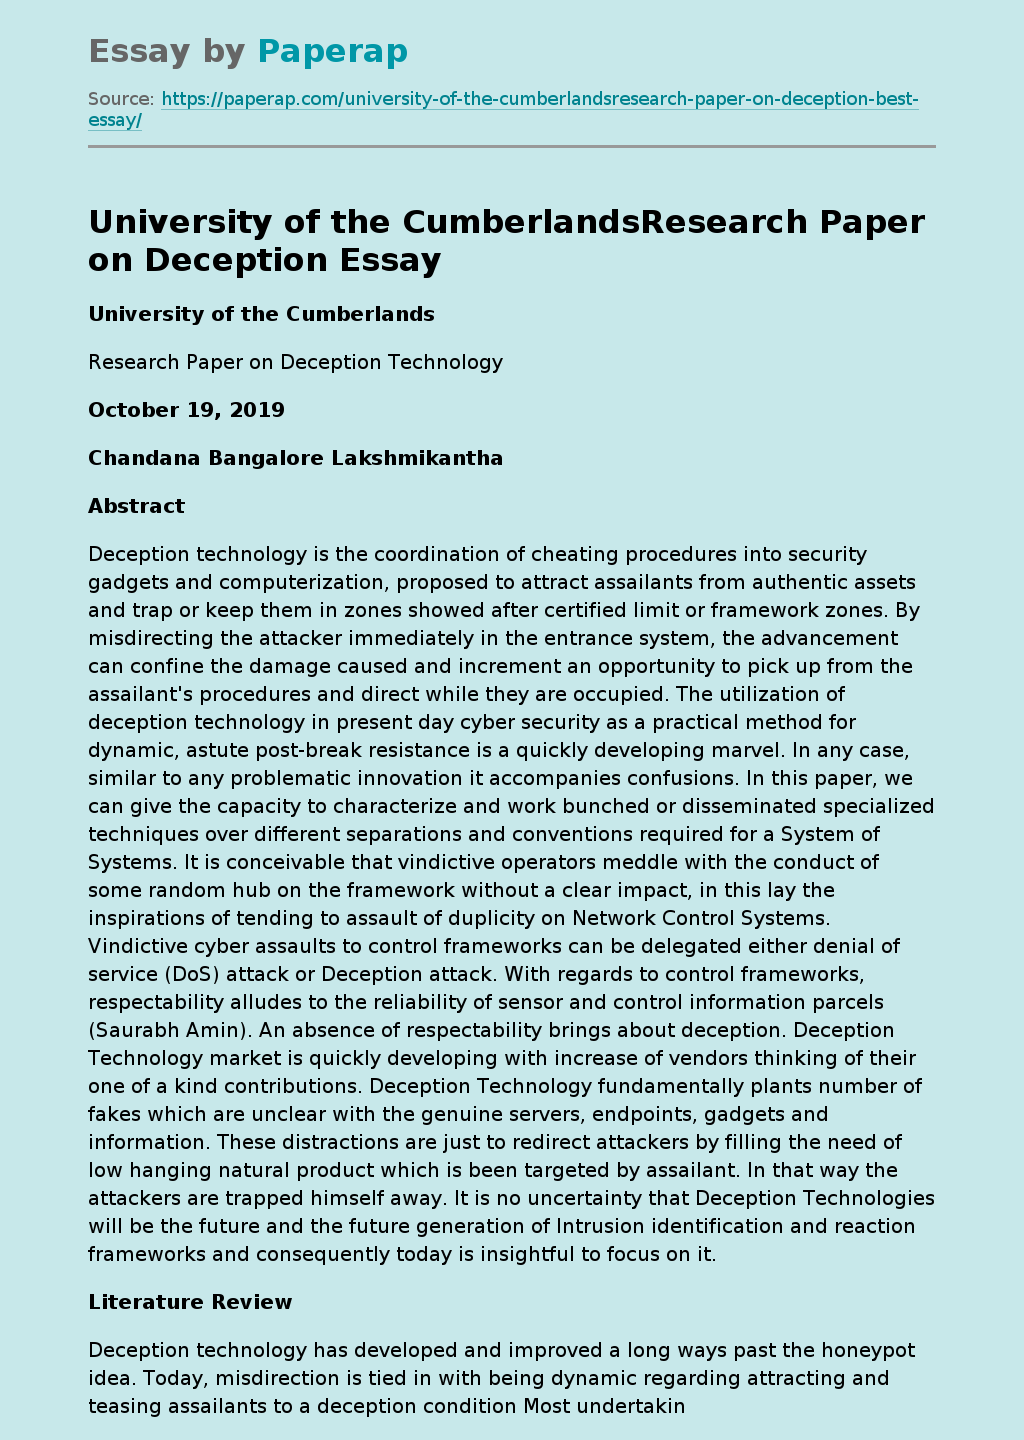 University of the Cumberlands Research Paper on Deception